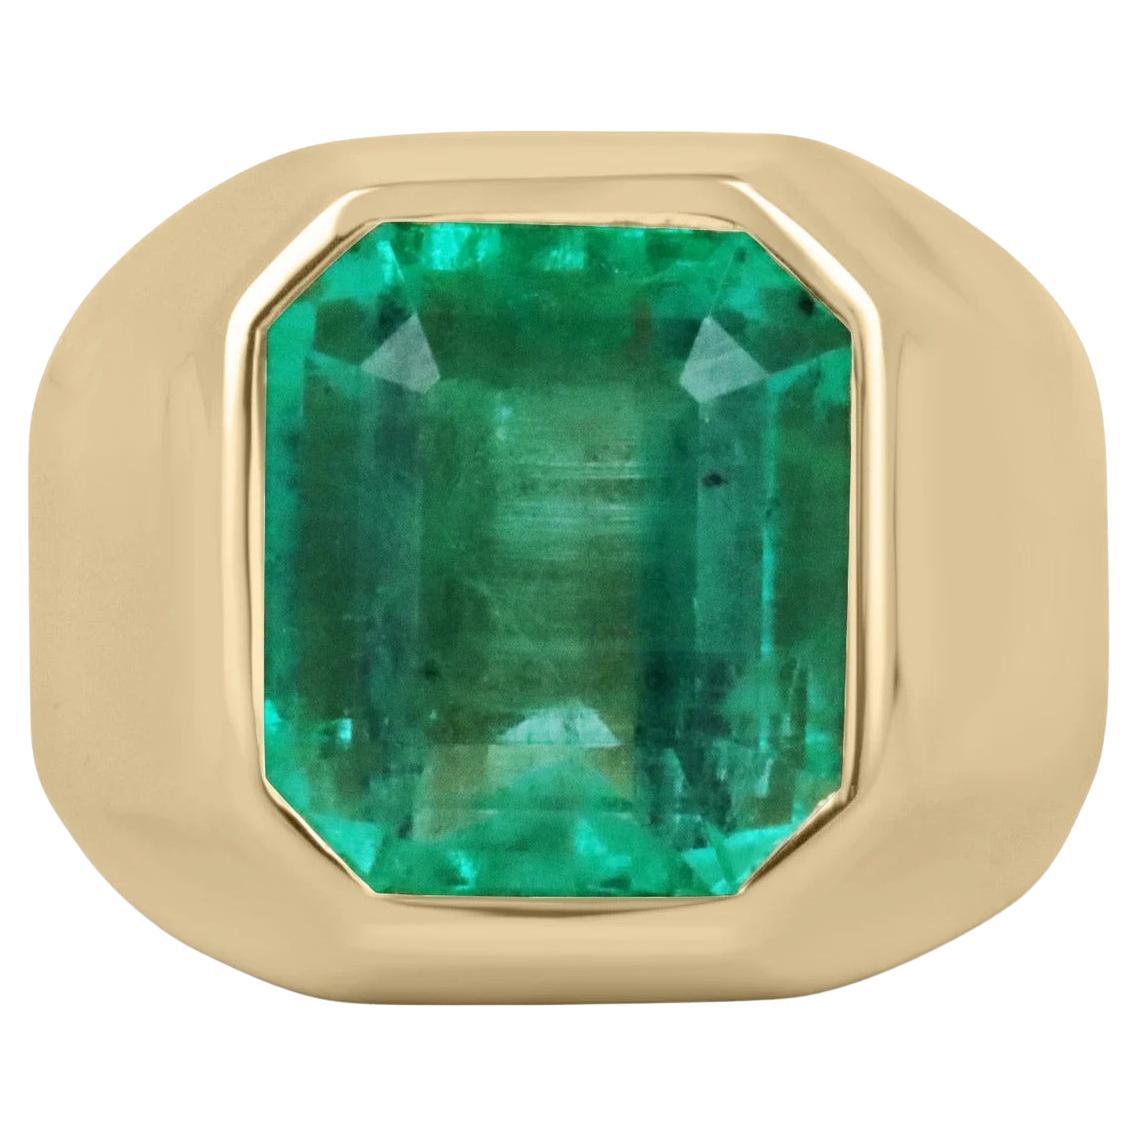 What does wearing an emerald ring mean?